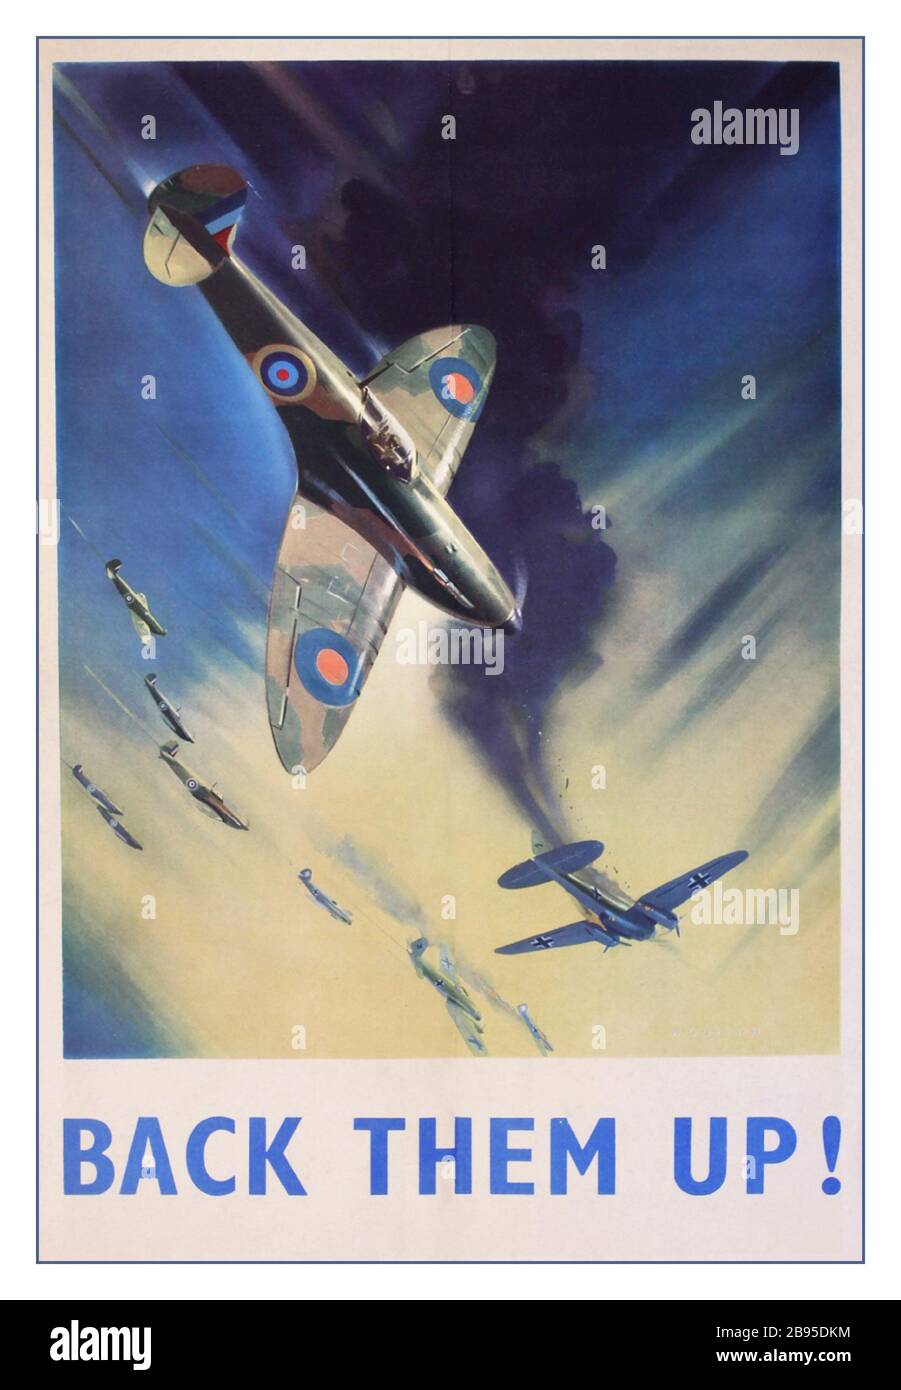 Vintage WW2 British RAF Propaganda War Effort Poster  'Back Them Up !' featuring Supermarine Spitfires in The Battle of Britain printed for HMSO by Fosh & Cross War poster - entitled 'Back Them Up!' - produced by the British Government during the Second World War. Posters such as these were used to promote and maintain morale among the civilian population, especially in times of crisis such as during the Battle of Britain and the Nazi Germany Blitz. 1940's Stock Photo